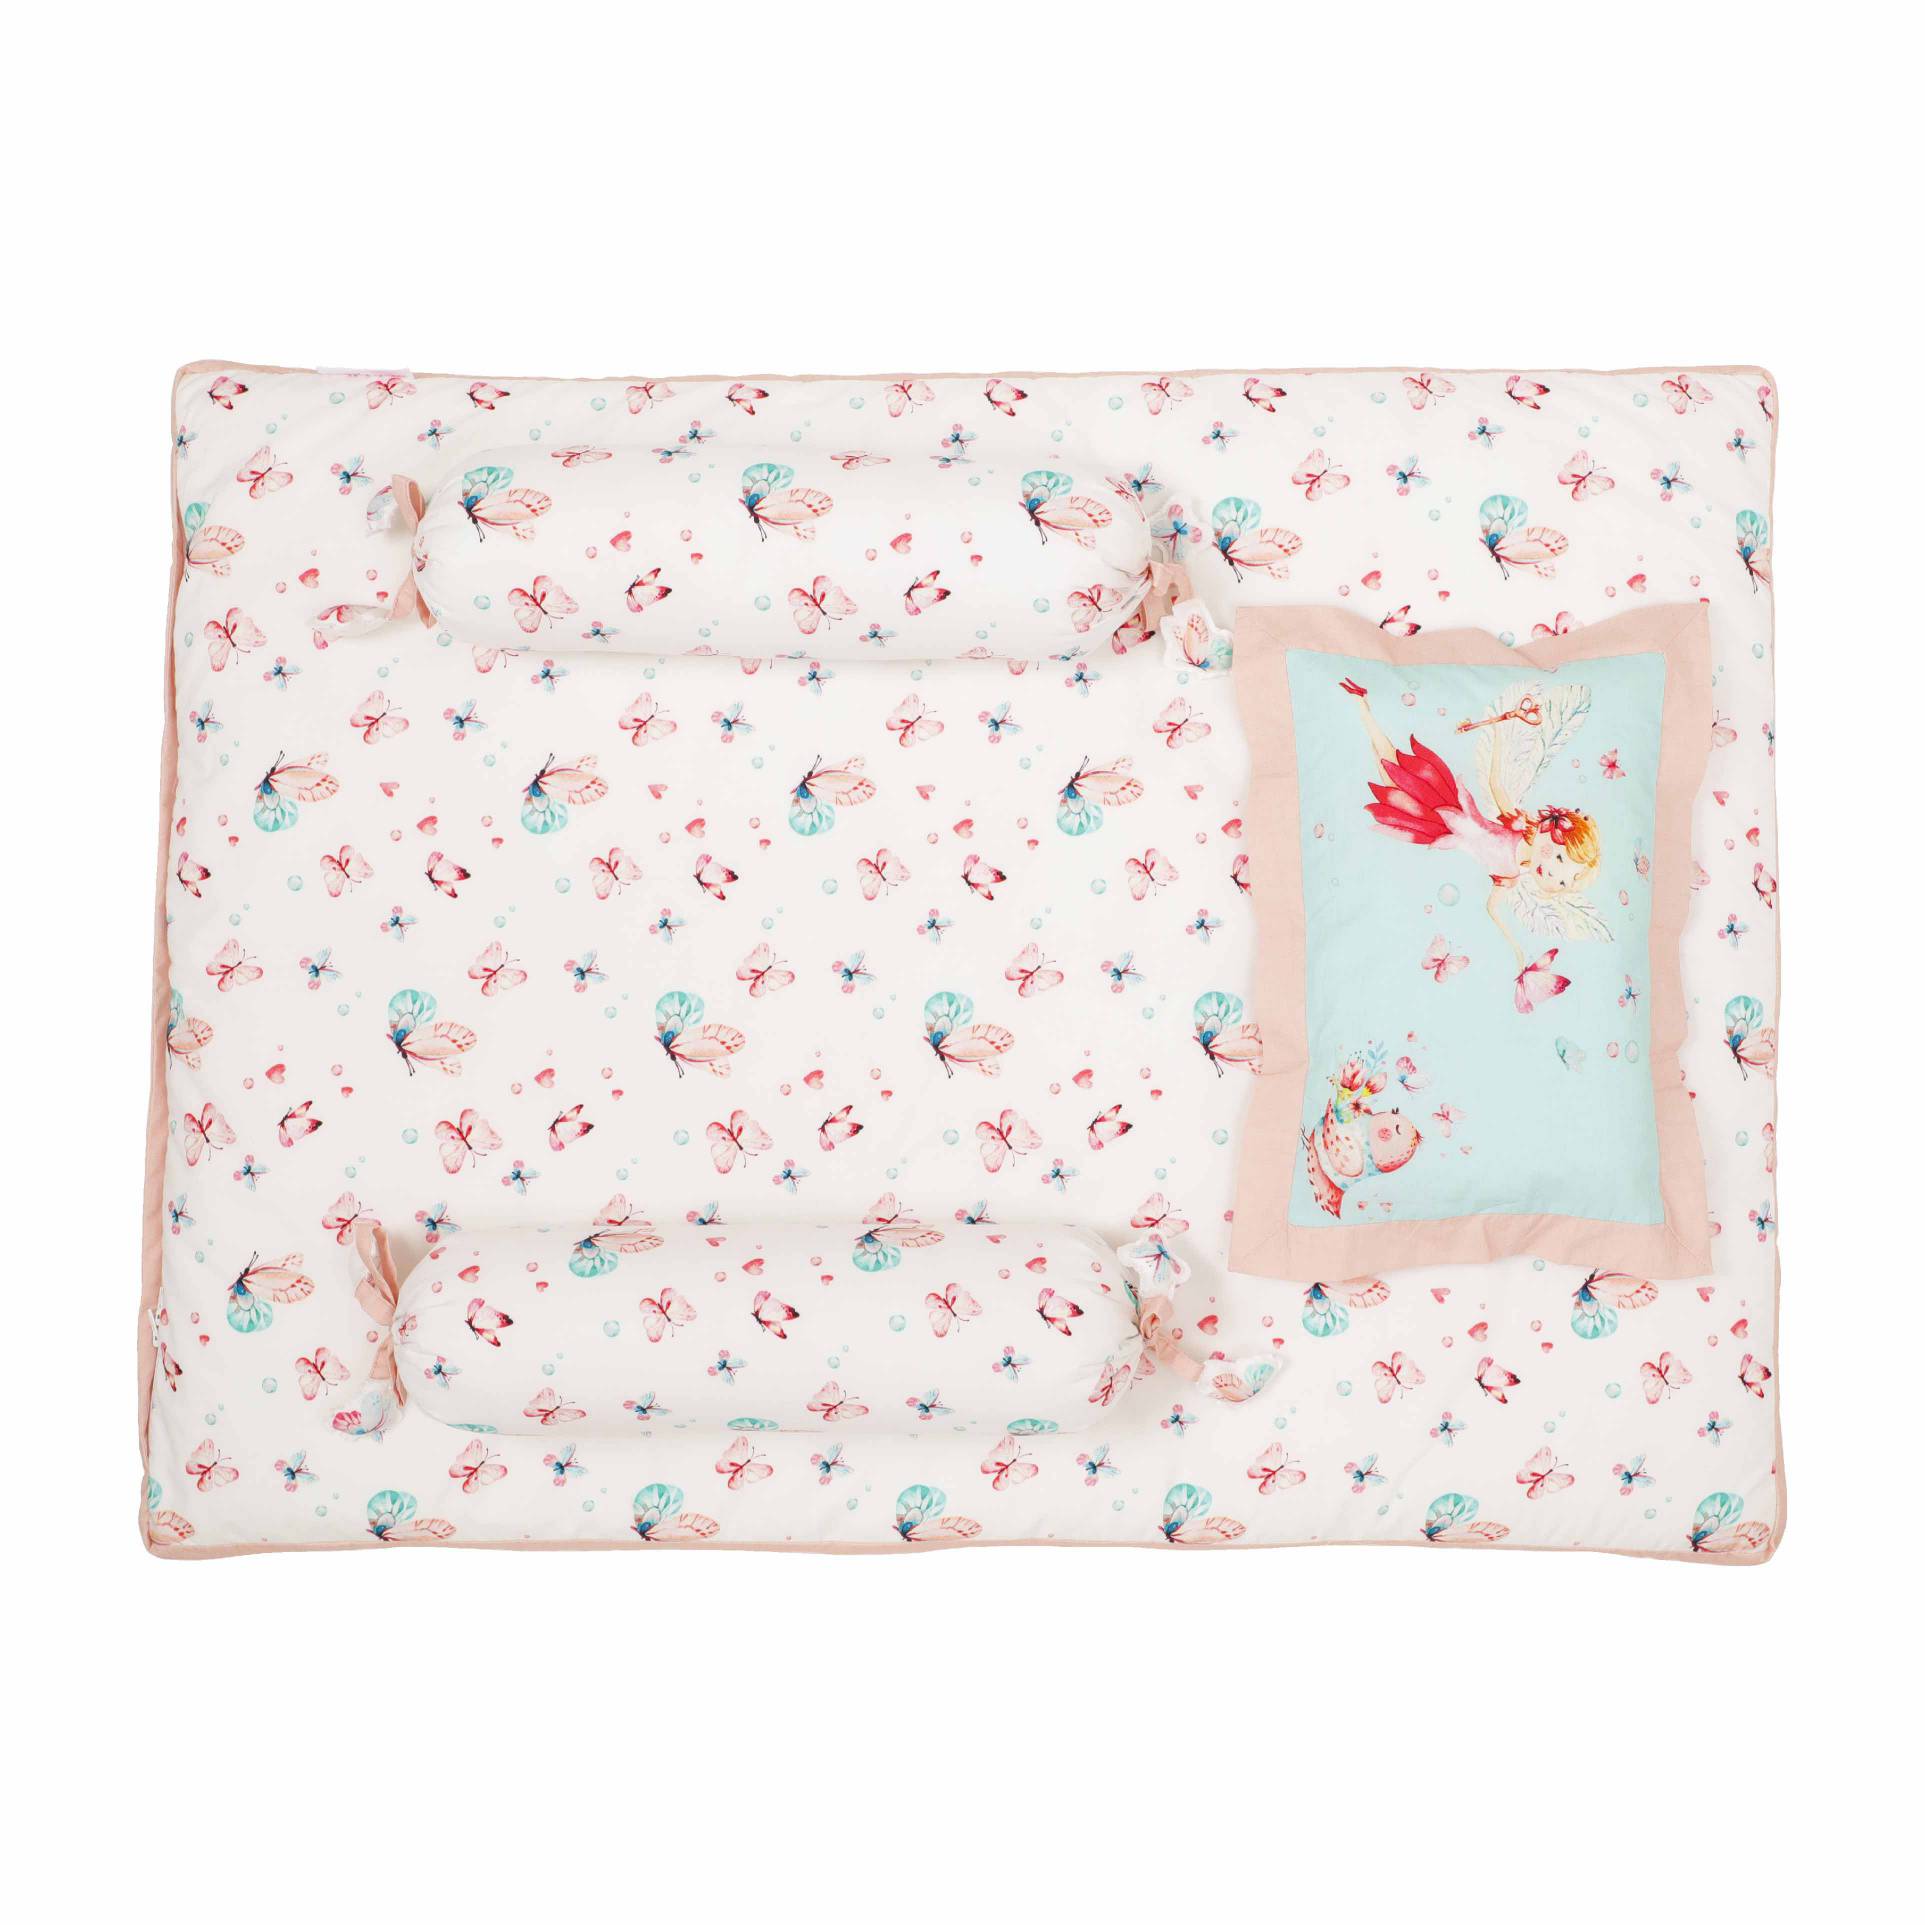 Fiora the Fairy - Snuggly Baby Bed